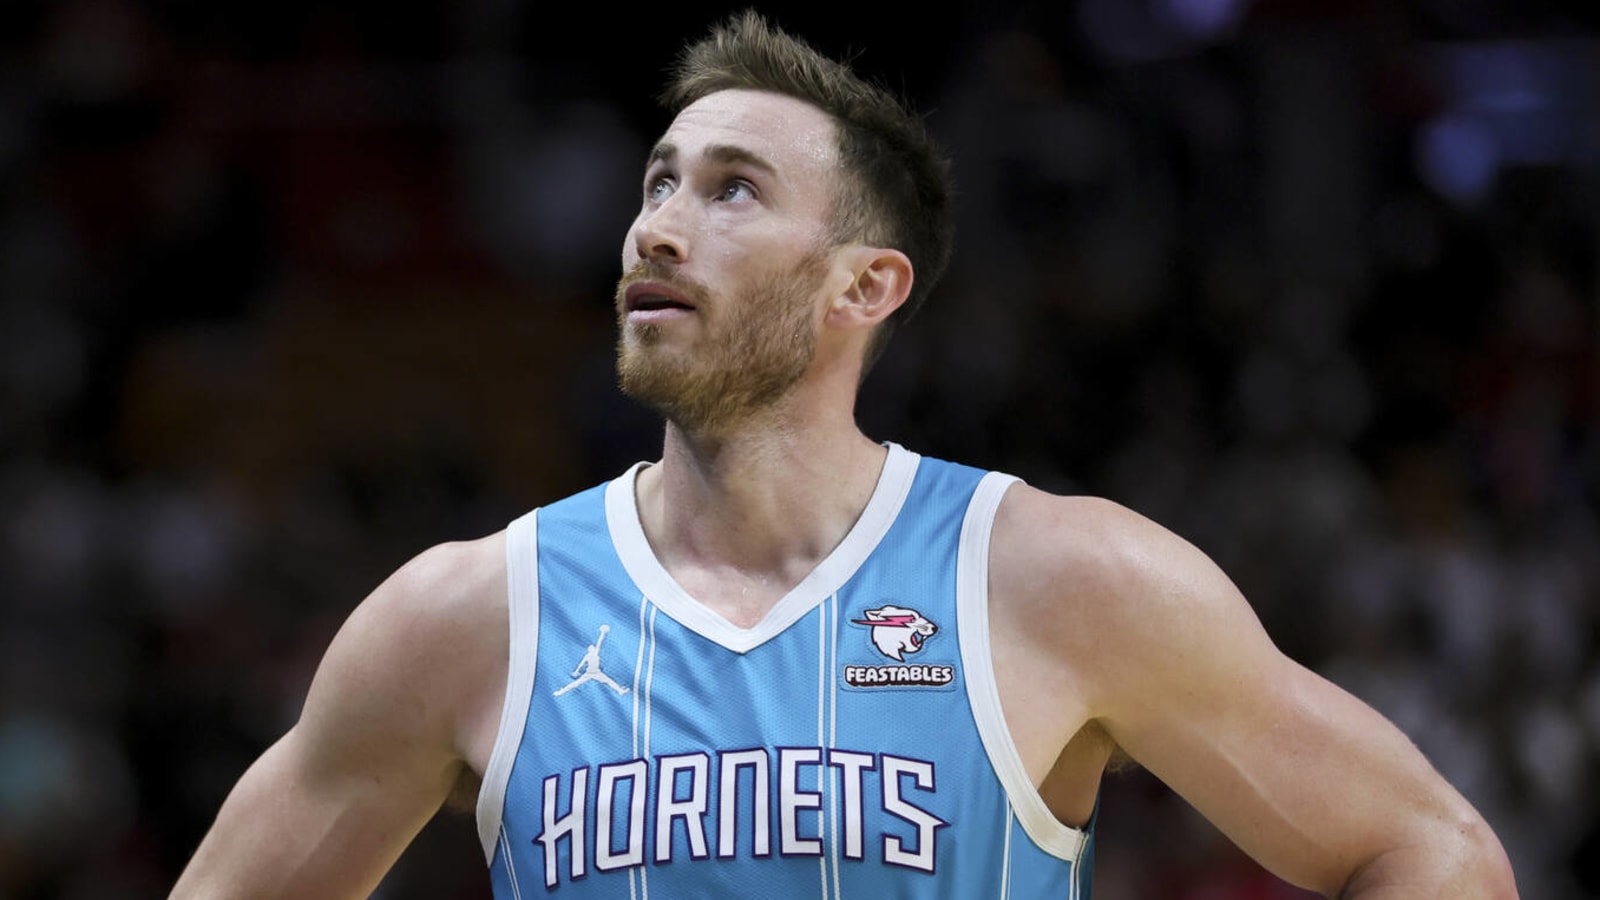 Report: Gordon Hayward, Hornets expected to part ways